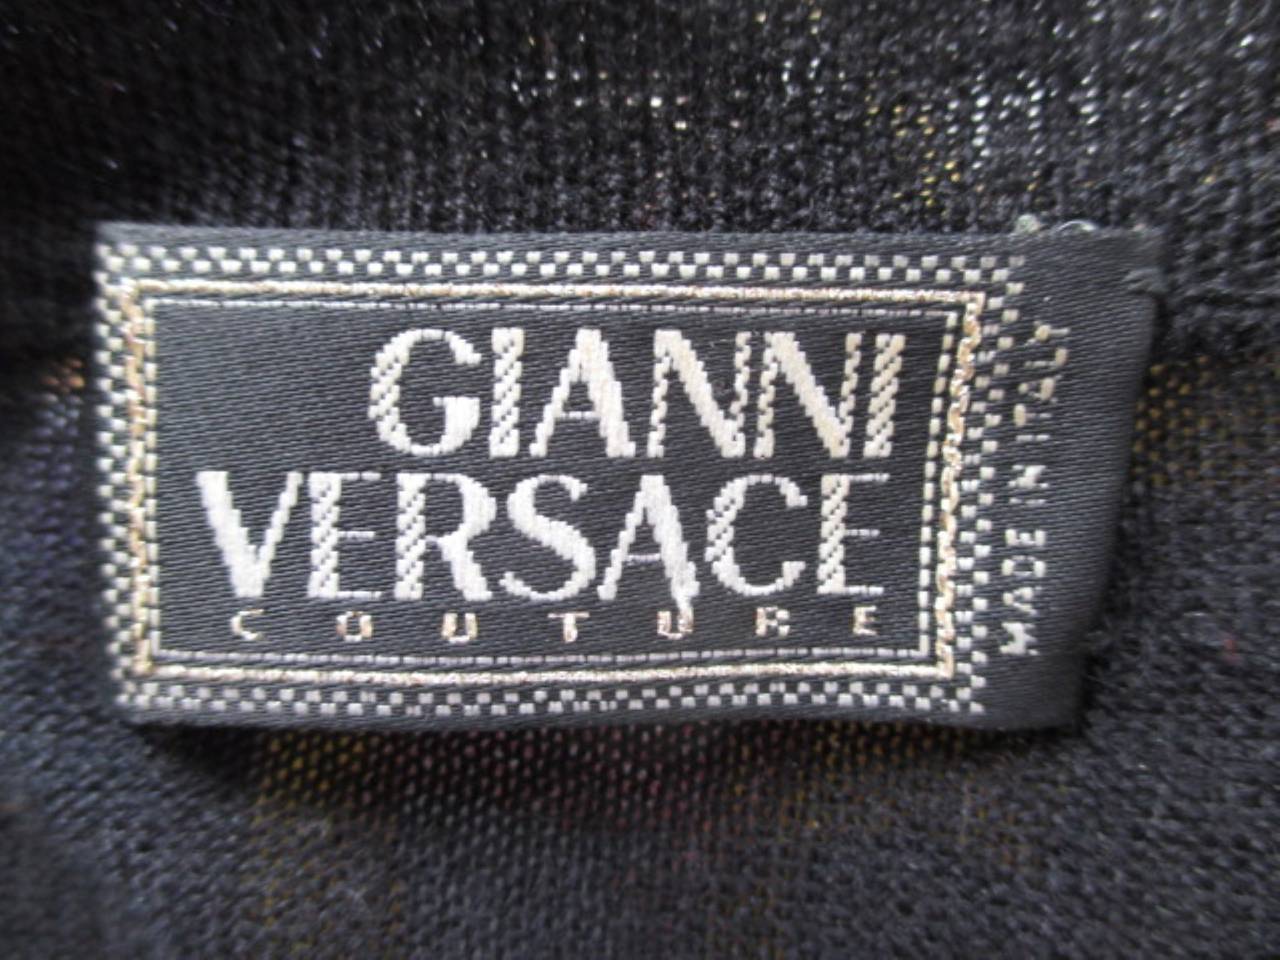 gianni versace couture